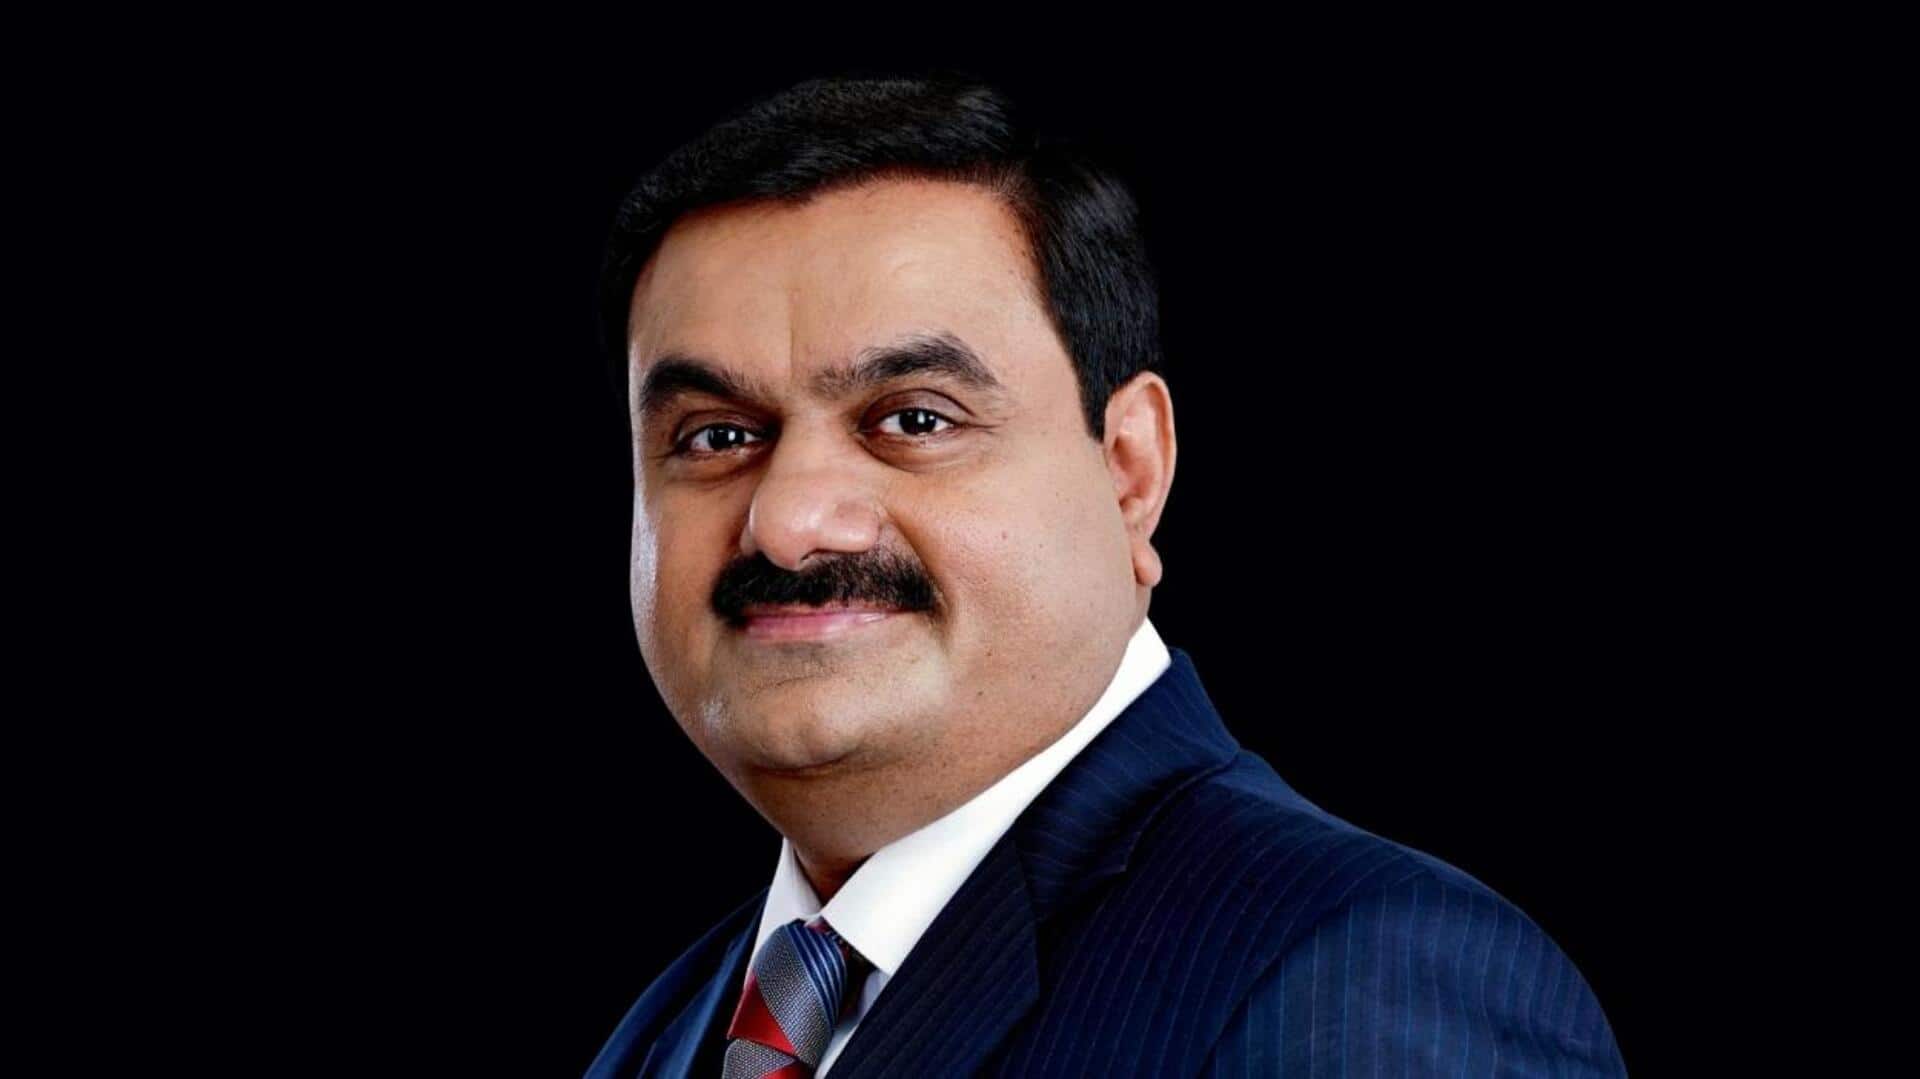 Gautam Adani once again becomes India's richest person